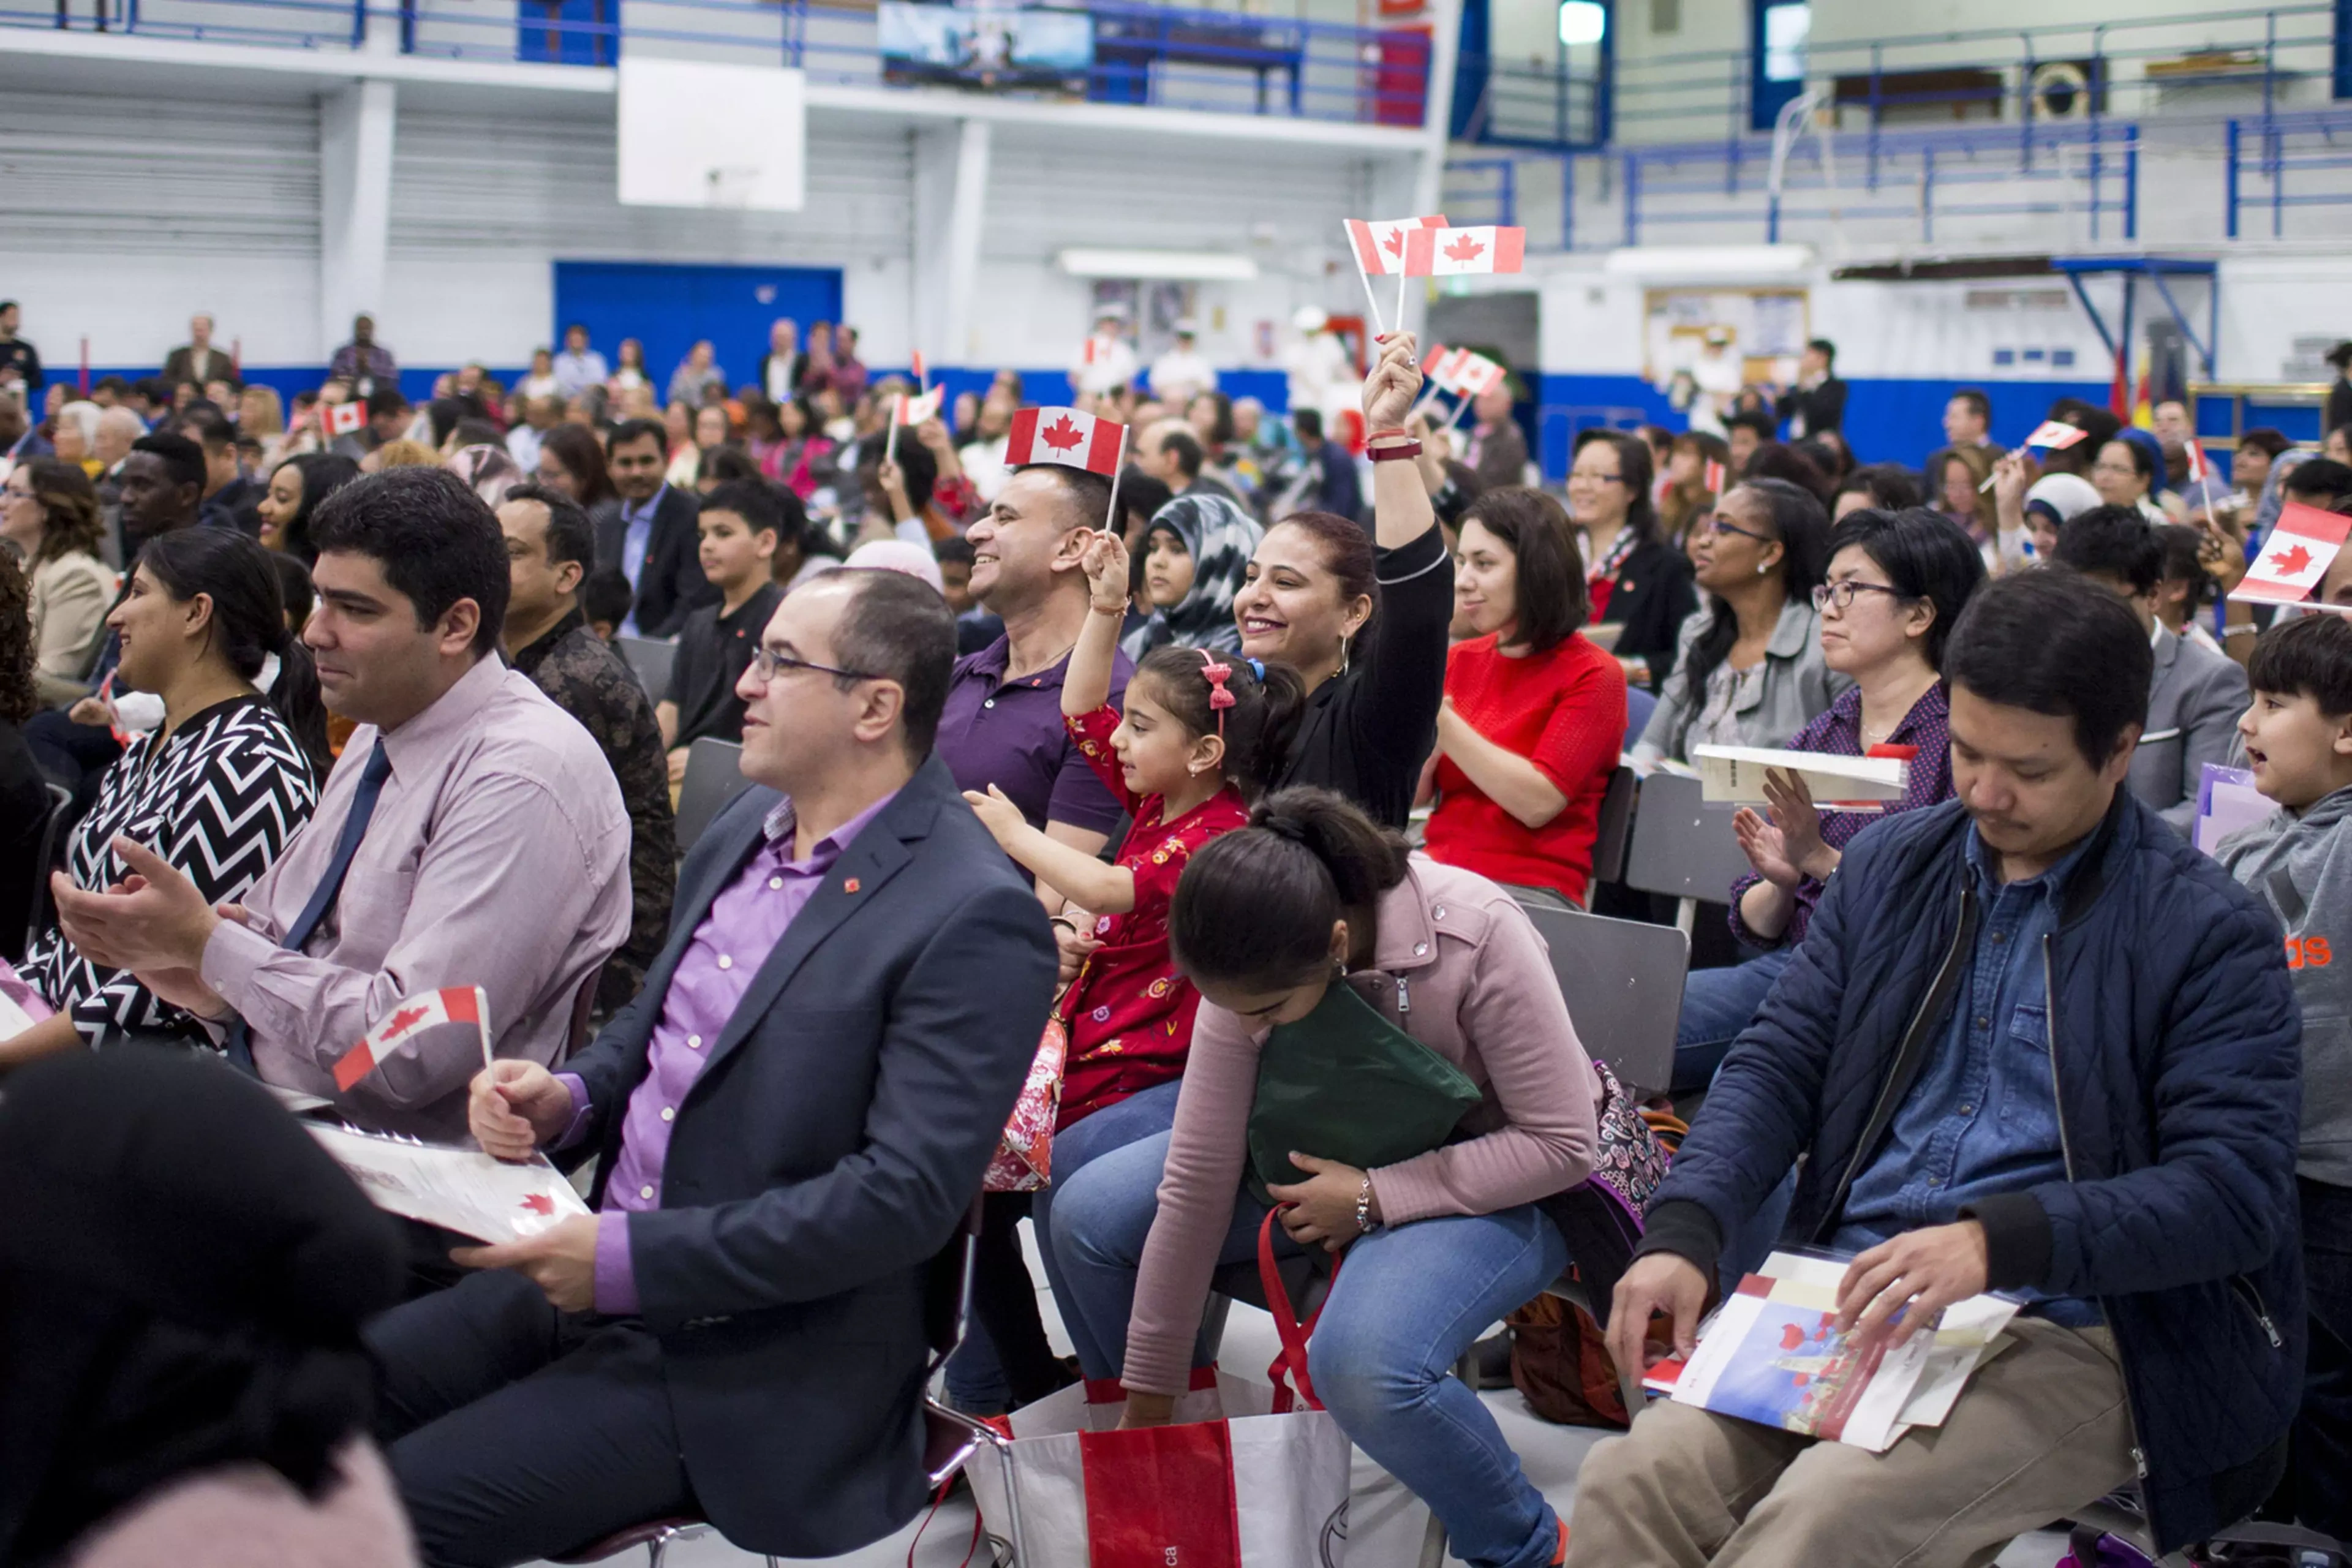 New Canadians wave the national flag during a citizenship ceremony in Toronto.